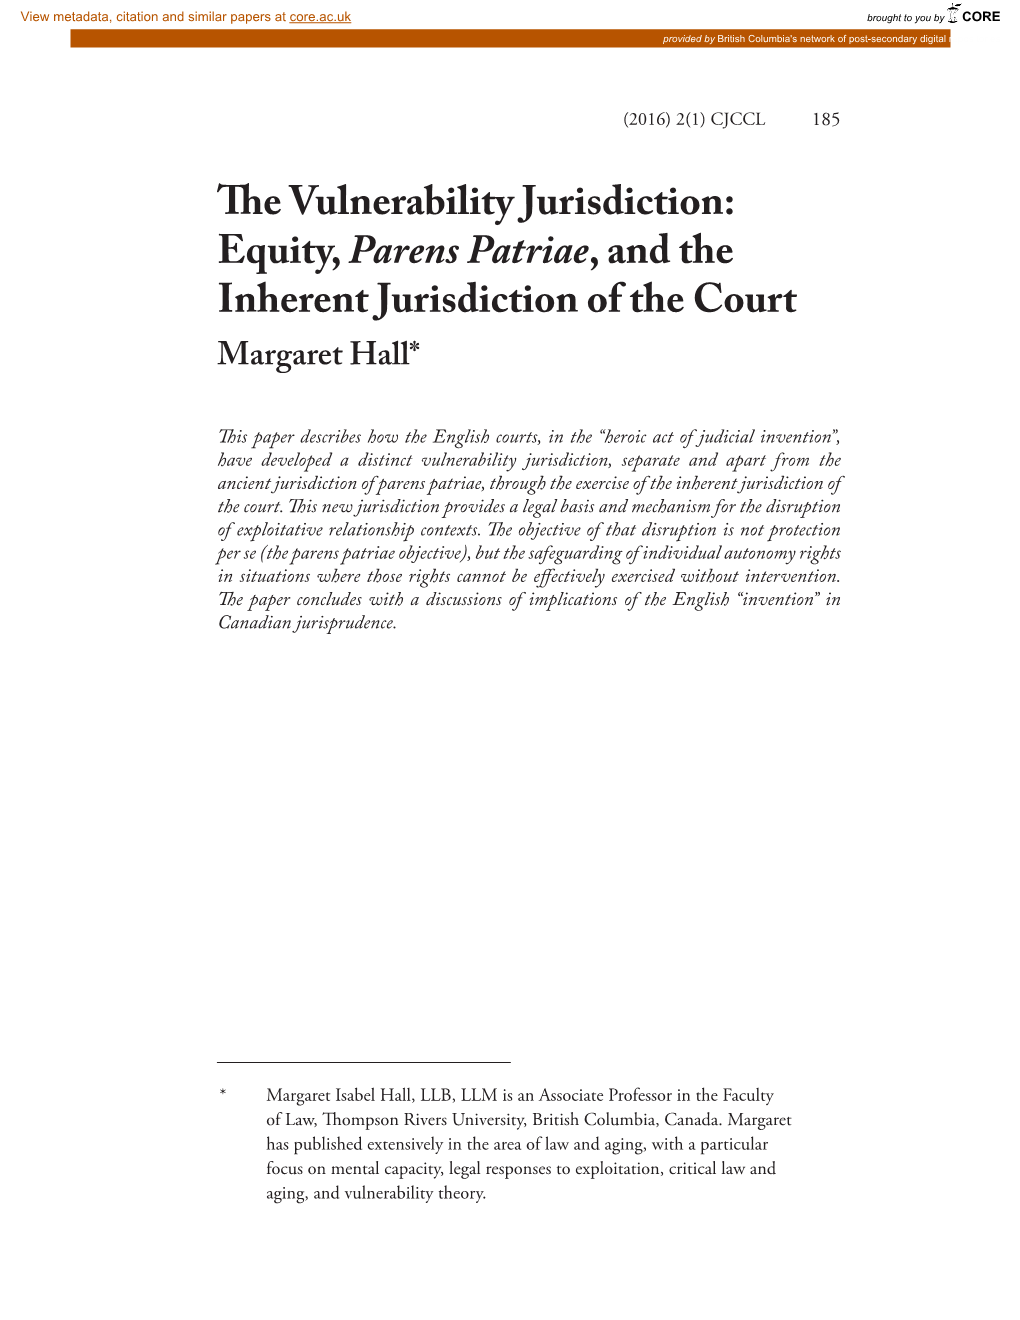 Equity, Parens Patriae, and the Inherent Jurisdiction of the Court Margaret Hall*